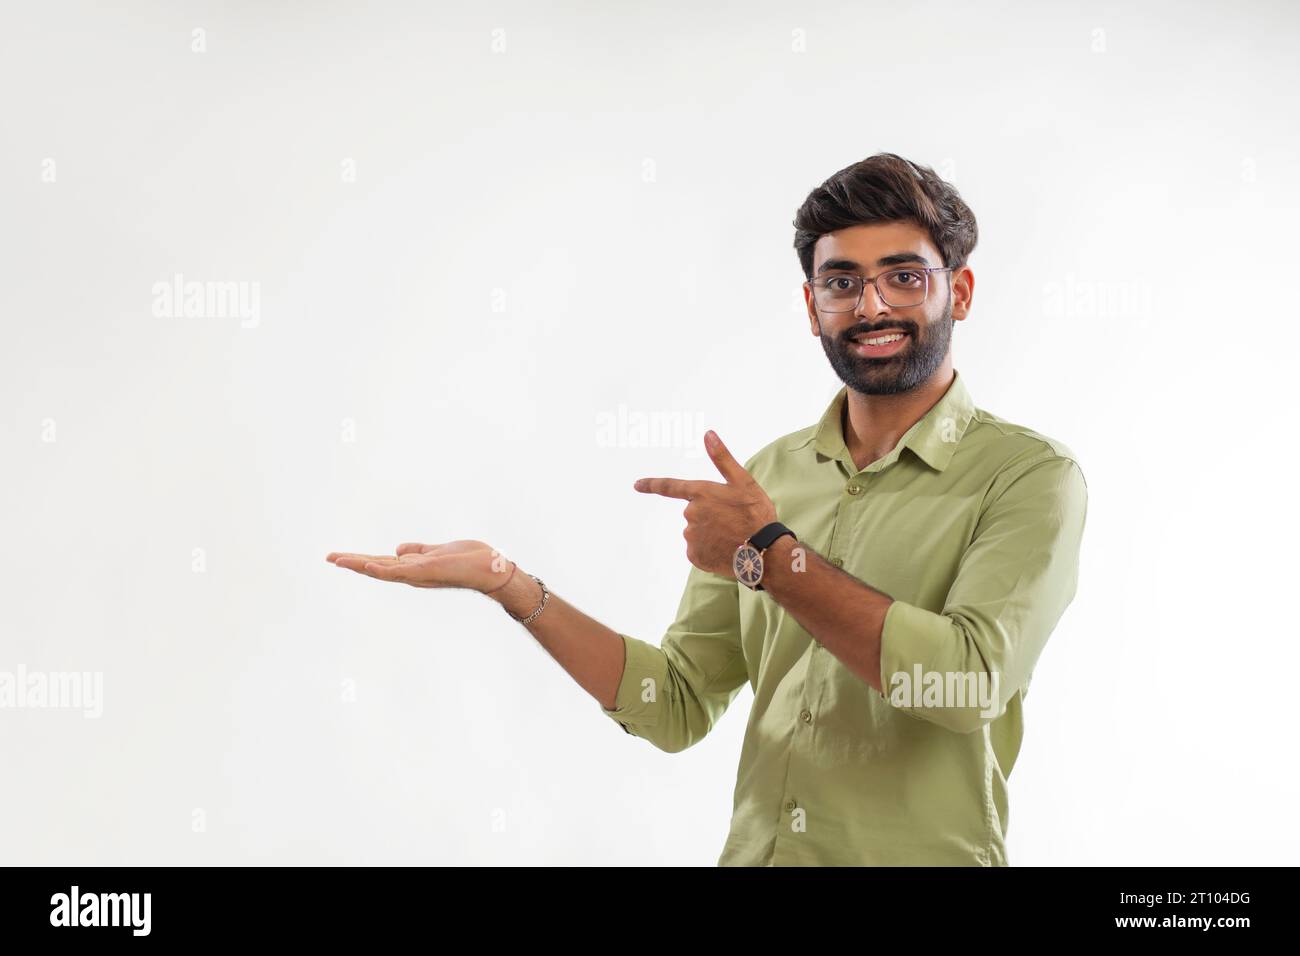 Portrait of a young man pointing at his empty palm against white background Stock Photo